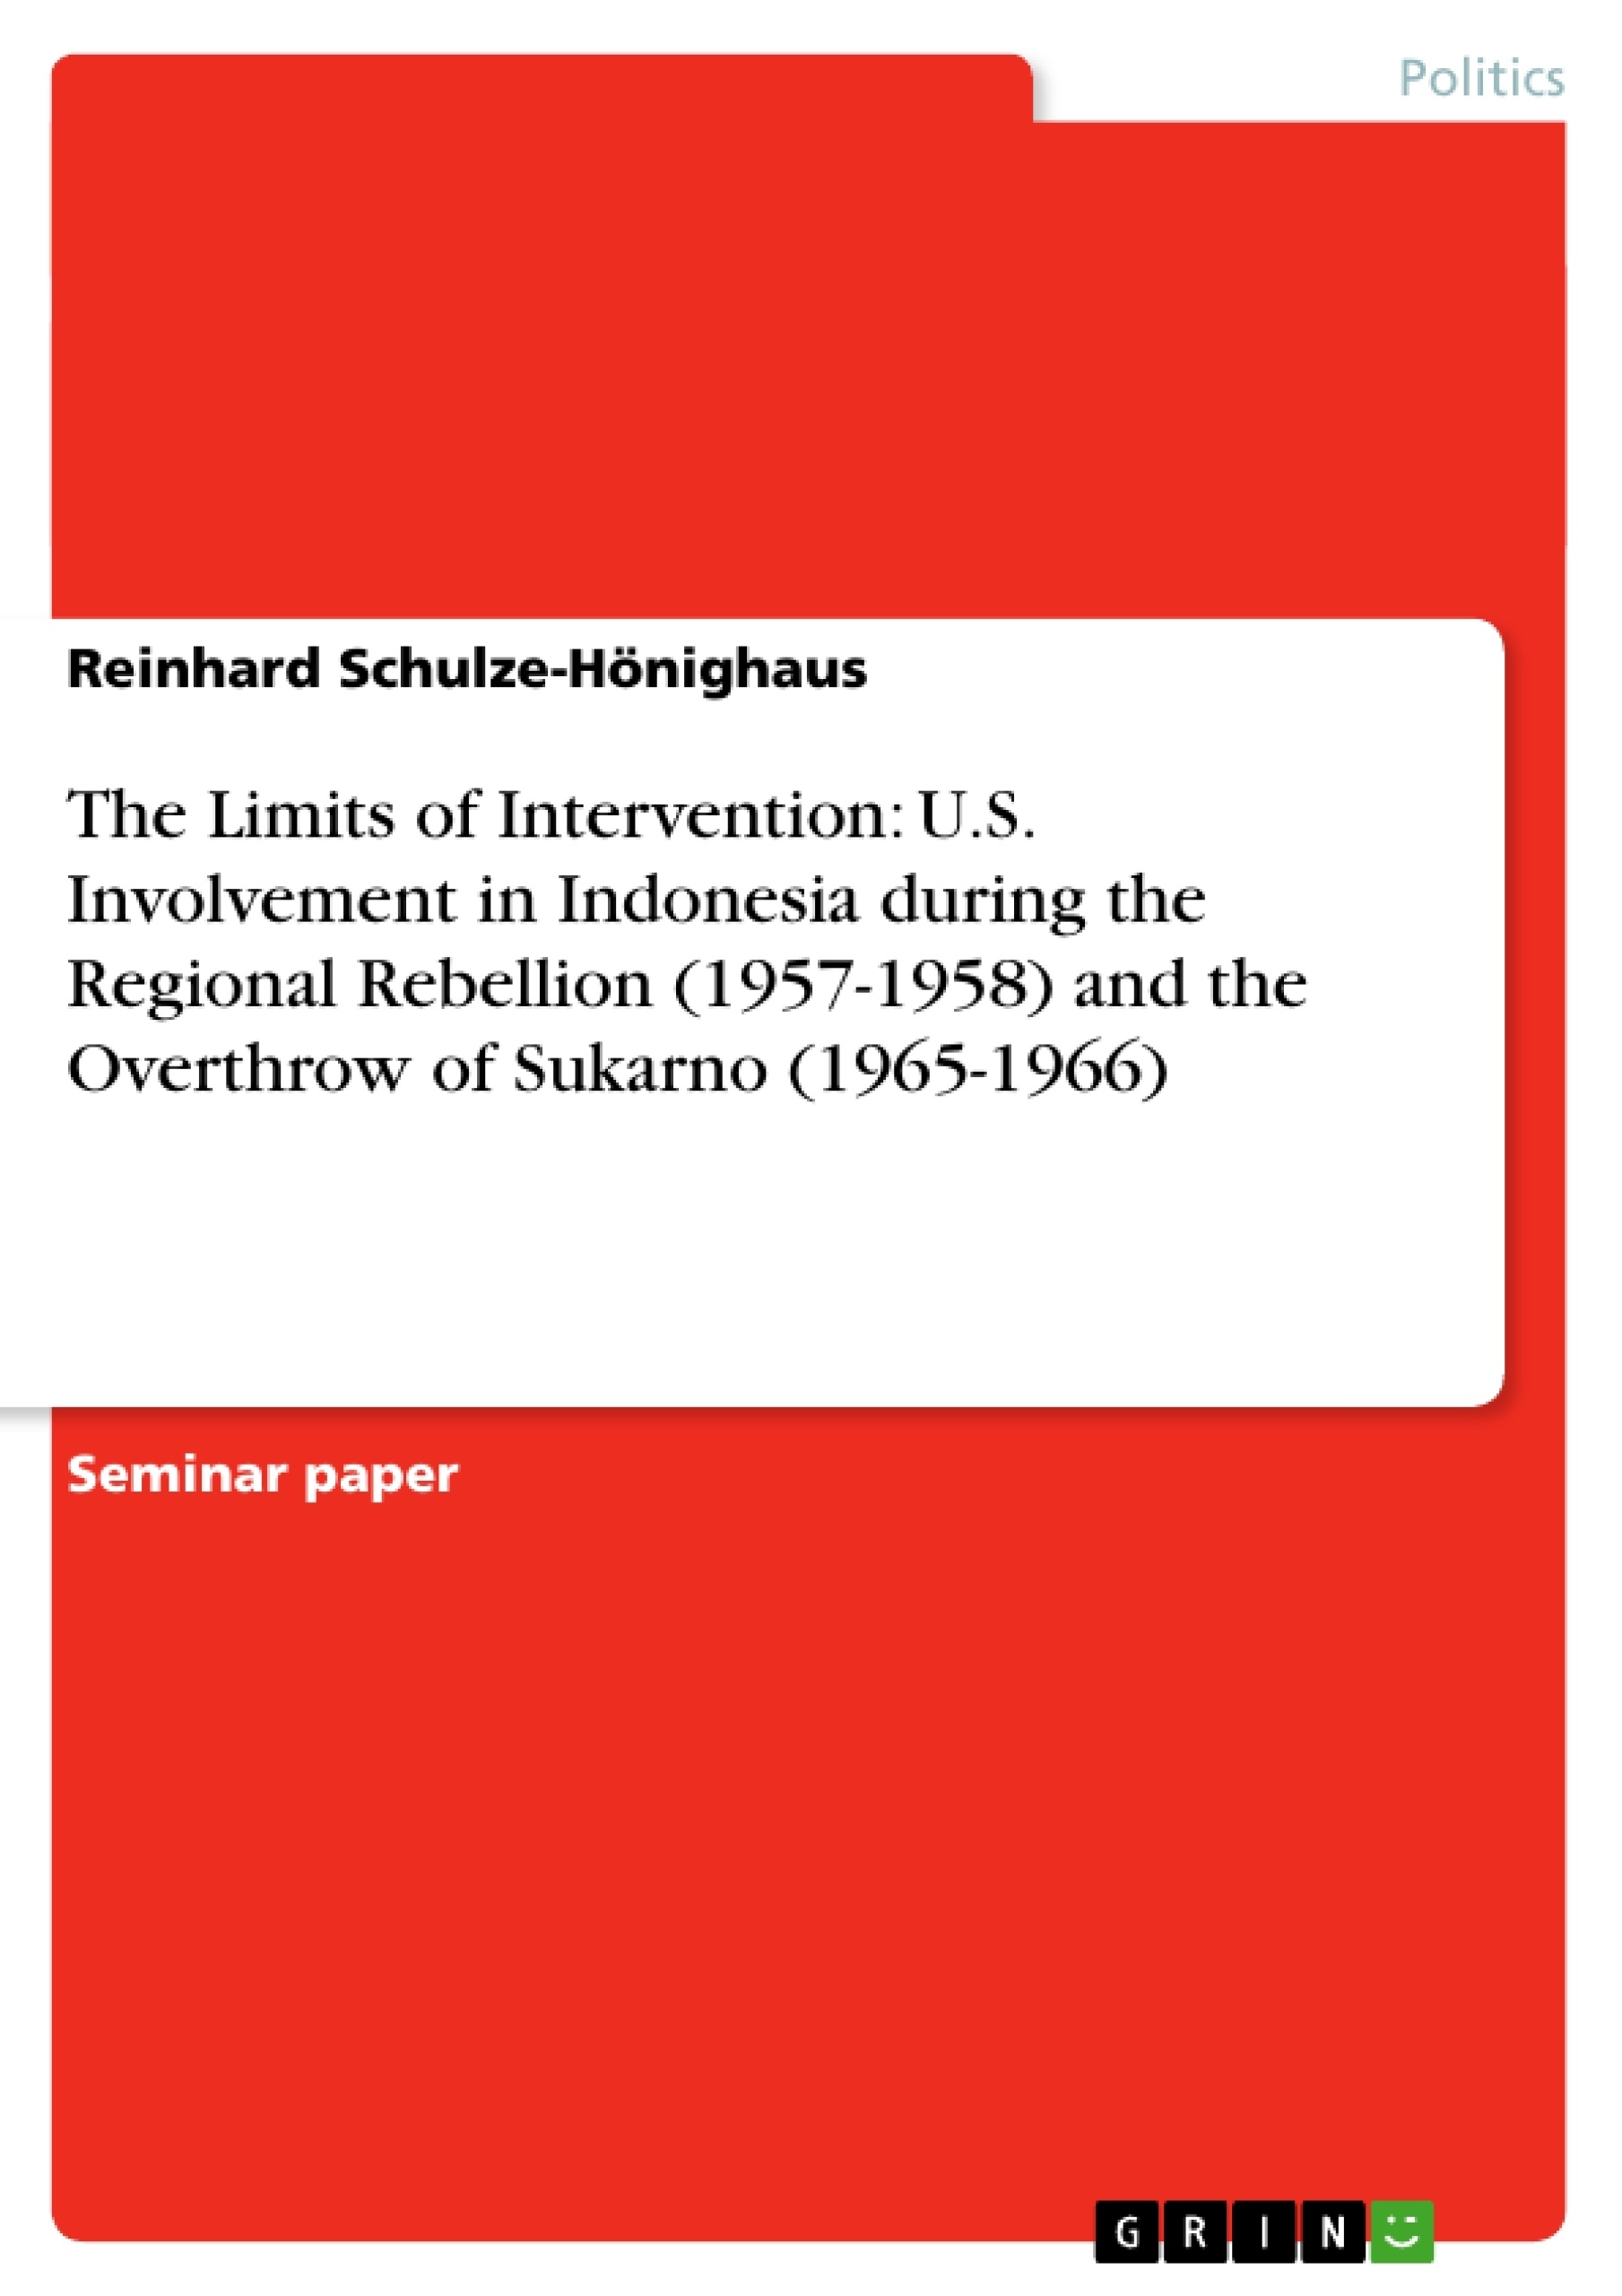 Titre: The Limits of Intervention: U.S. Involvement in Indonesia during the Regional Rebellion (1957-1958) and the Overthrow of Sukarno (1965-1966)